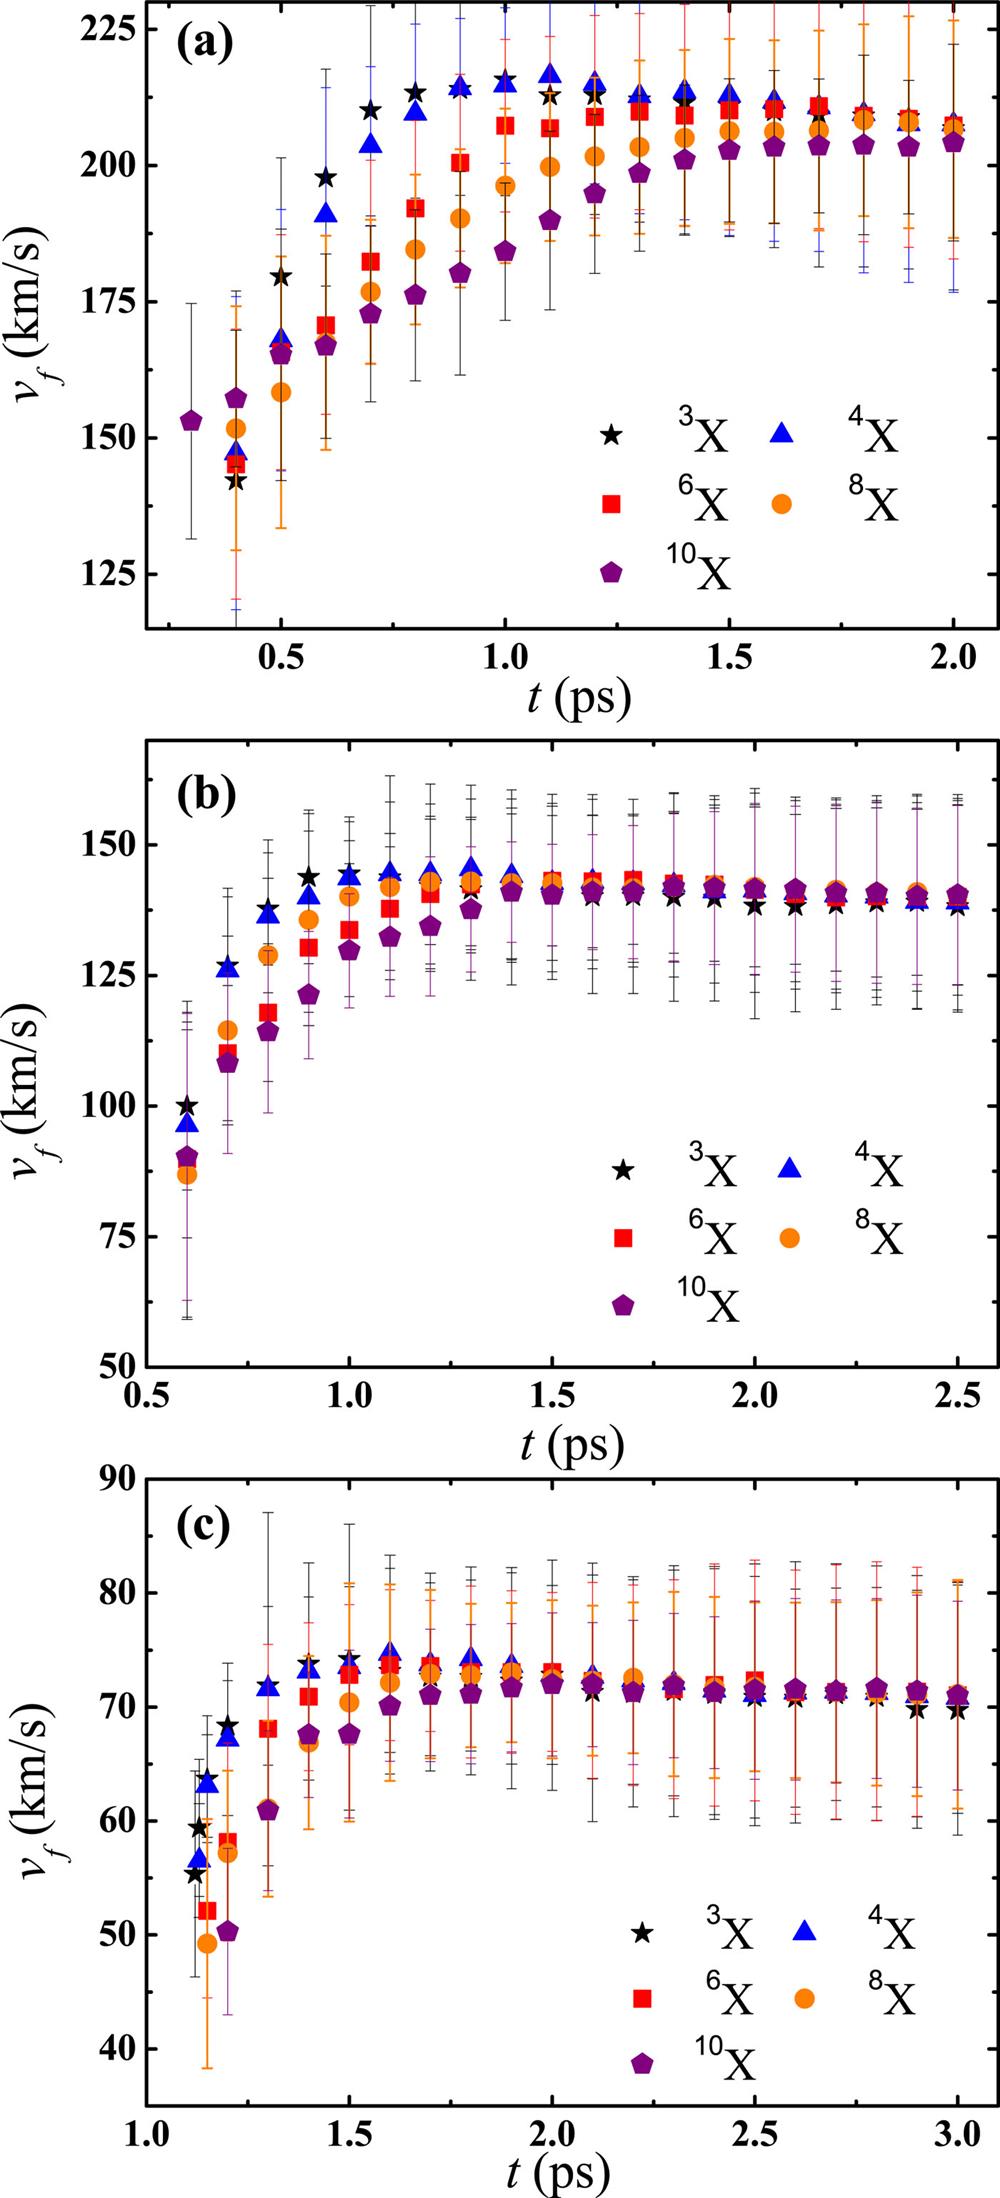 Effects of atomic mass mX and piston speed vp on the velocity of the reflecting surface, vf. The reflecting surface is near nc = 2.348 × 1021 cm−3, and the piston speed is (a) vp = 75.0 km/s, (b) vp = 50.0 km/s, or (c) vp = 25.0 km/s.